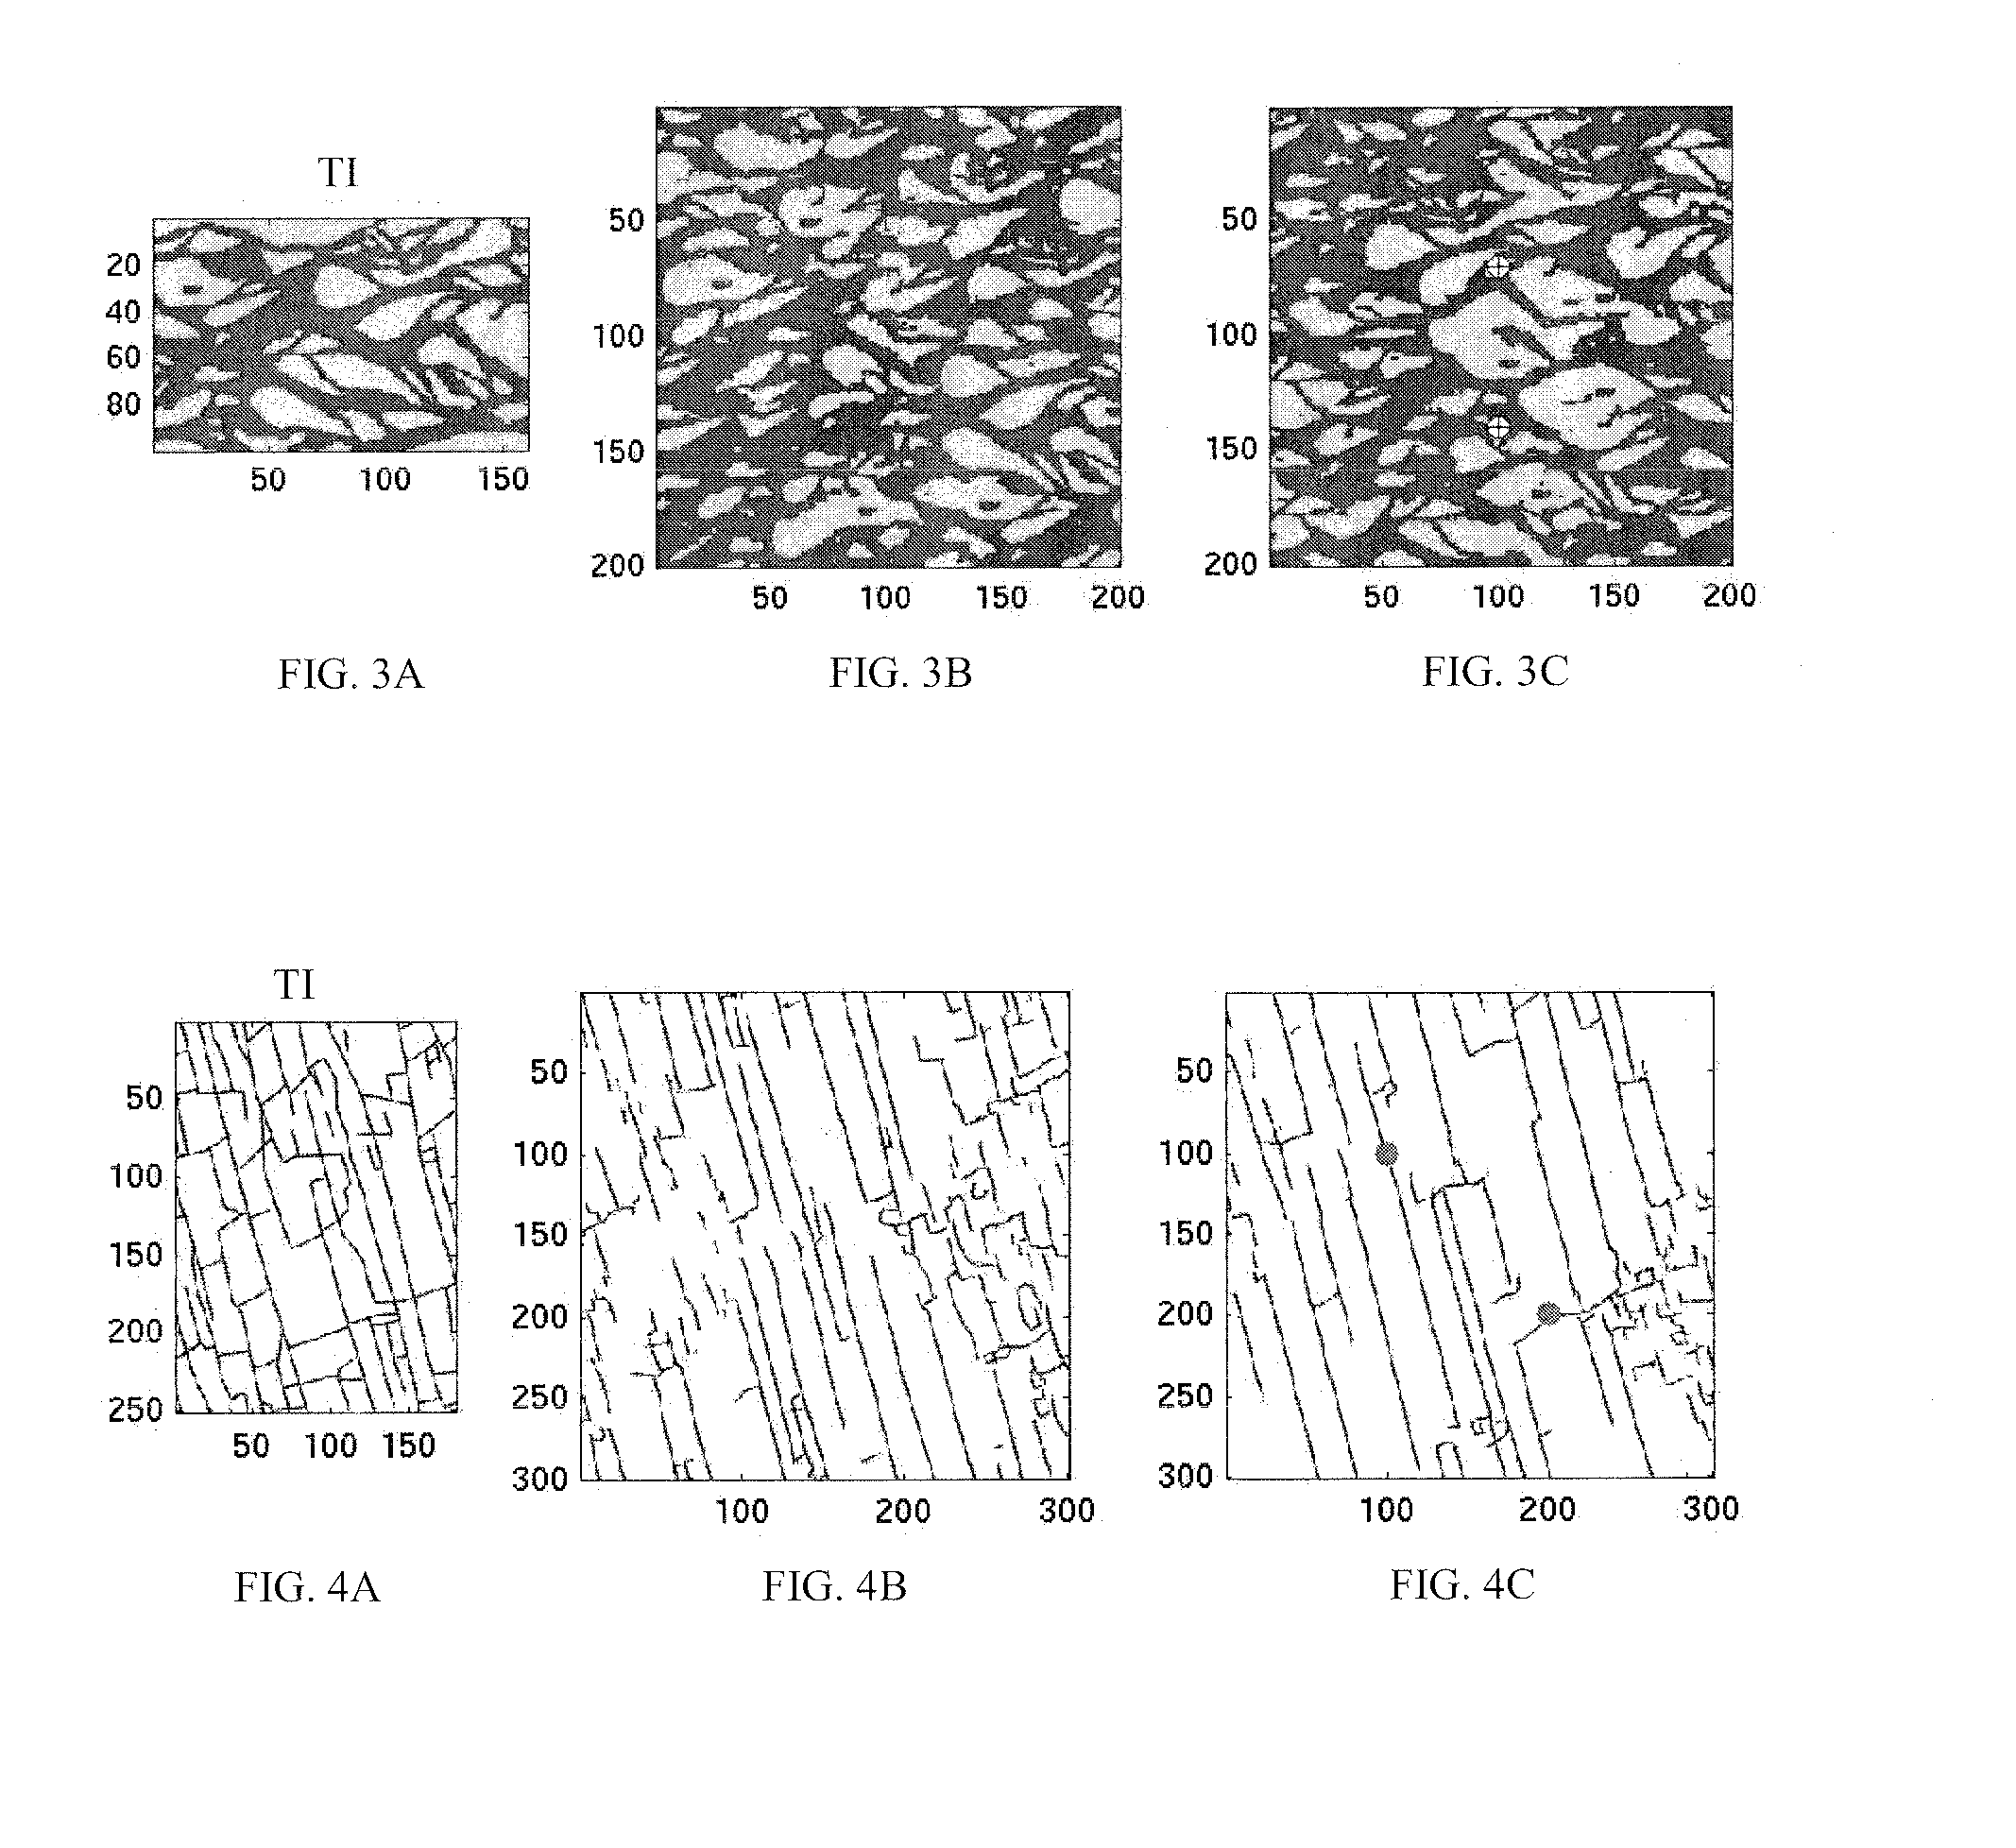 Method of constructing a grid representative of a property distribution by conditional multipoint statistical simulation